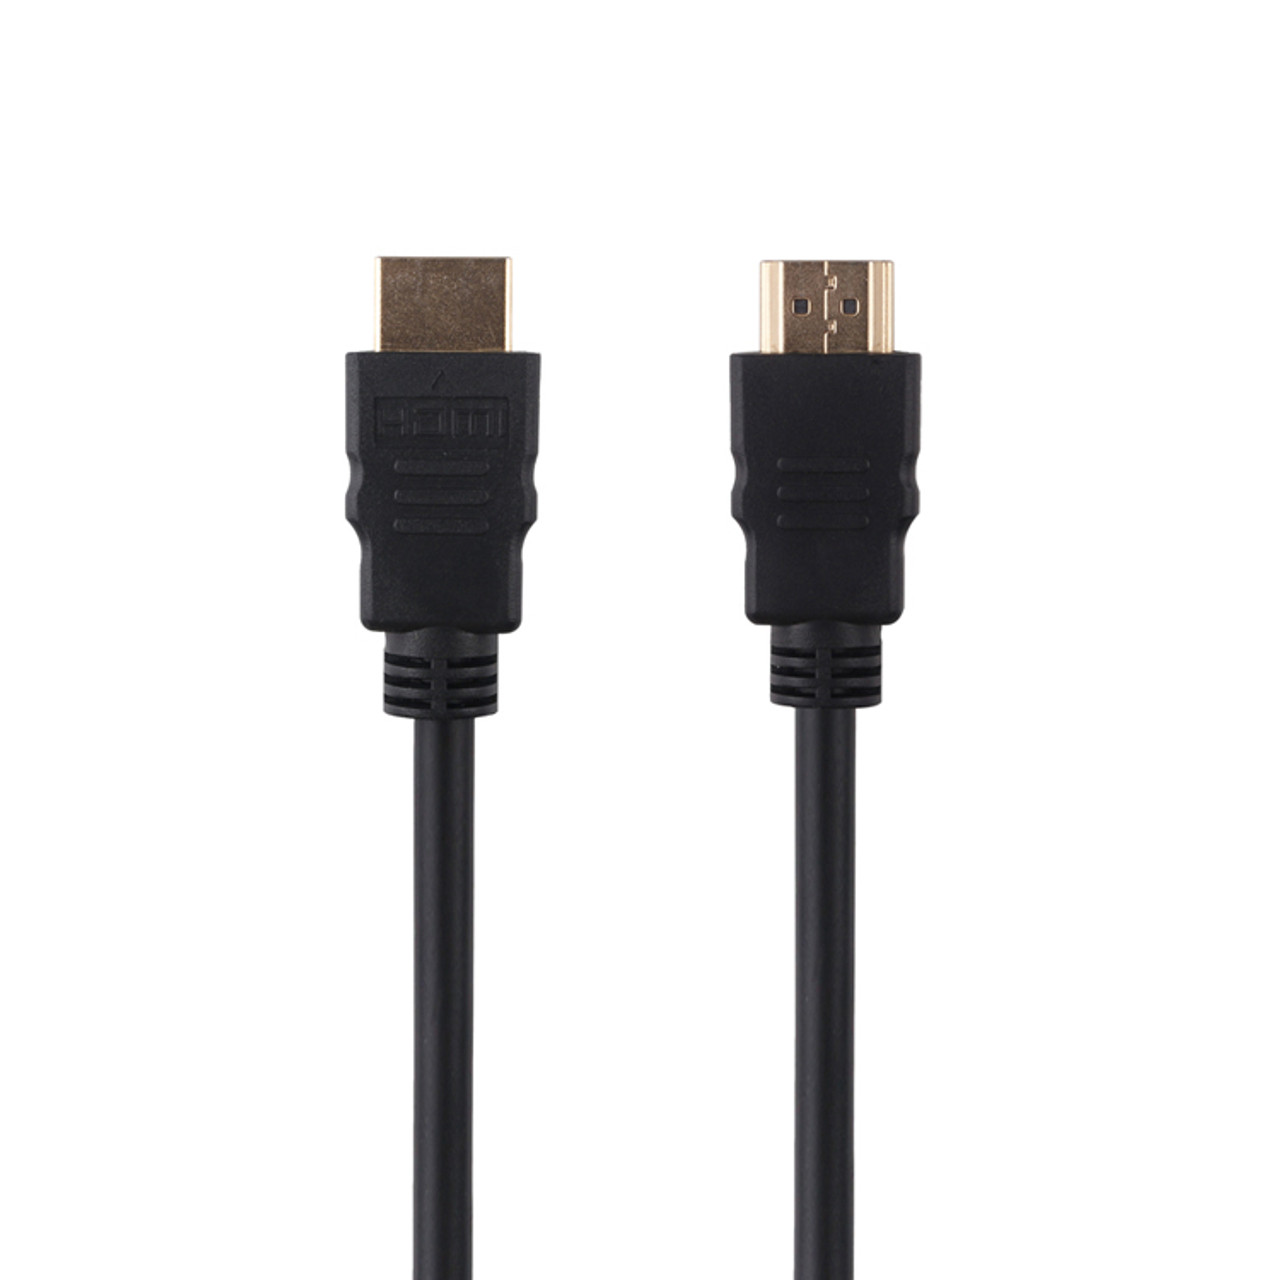 3M HDMI 4K2K 30hz Cable with 3D Ethernet